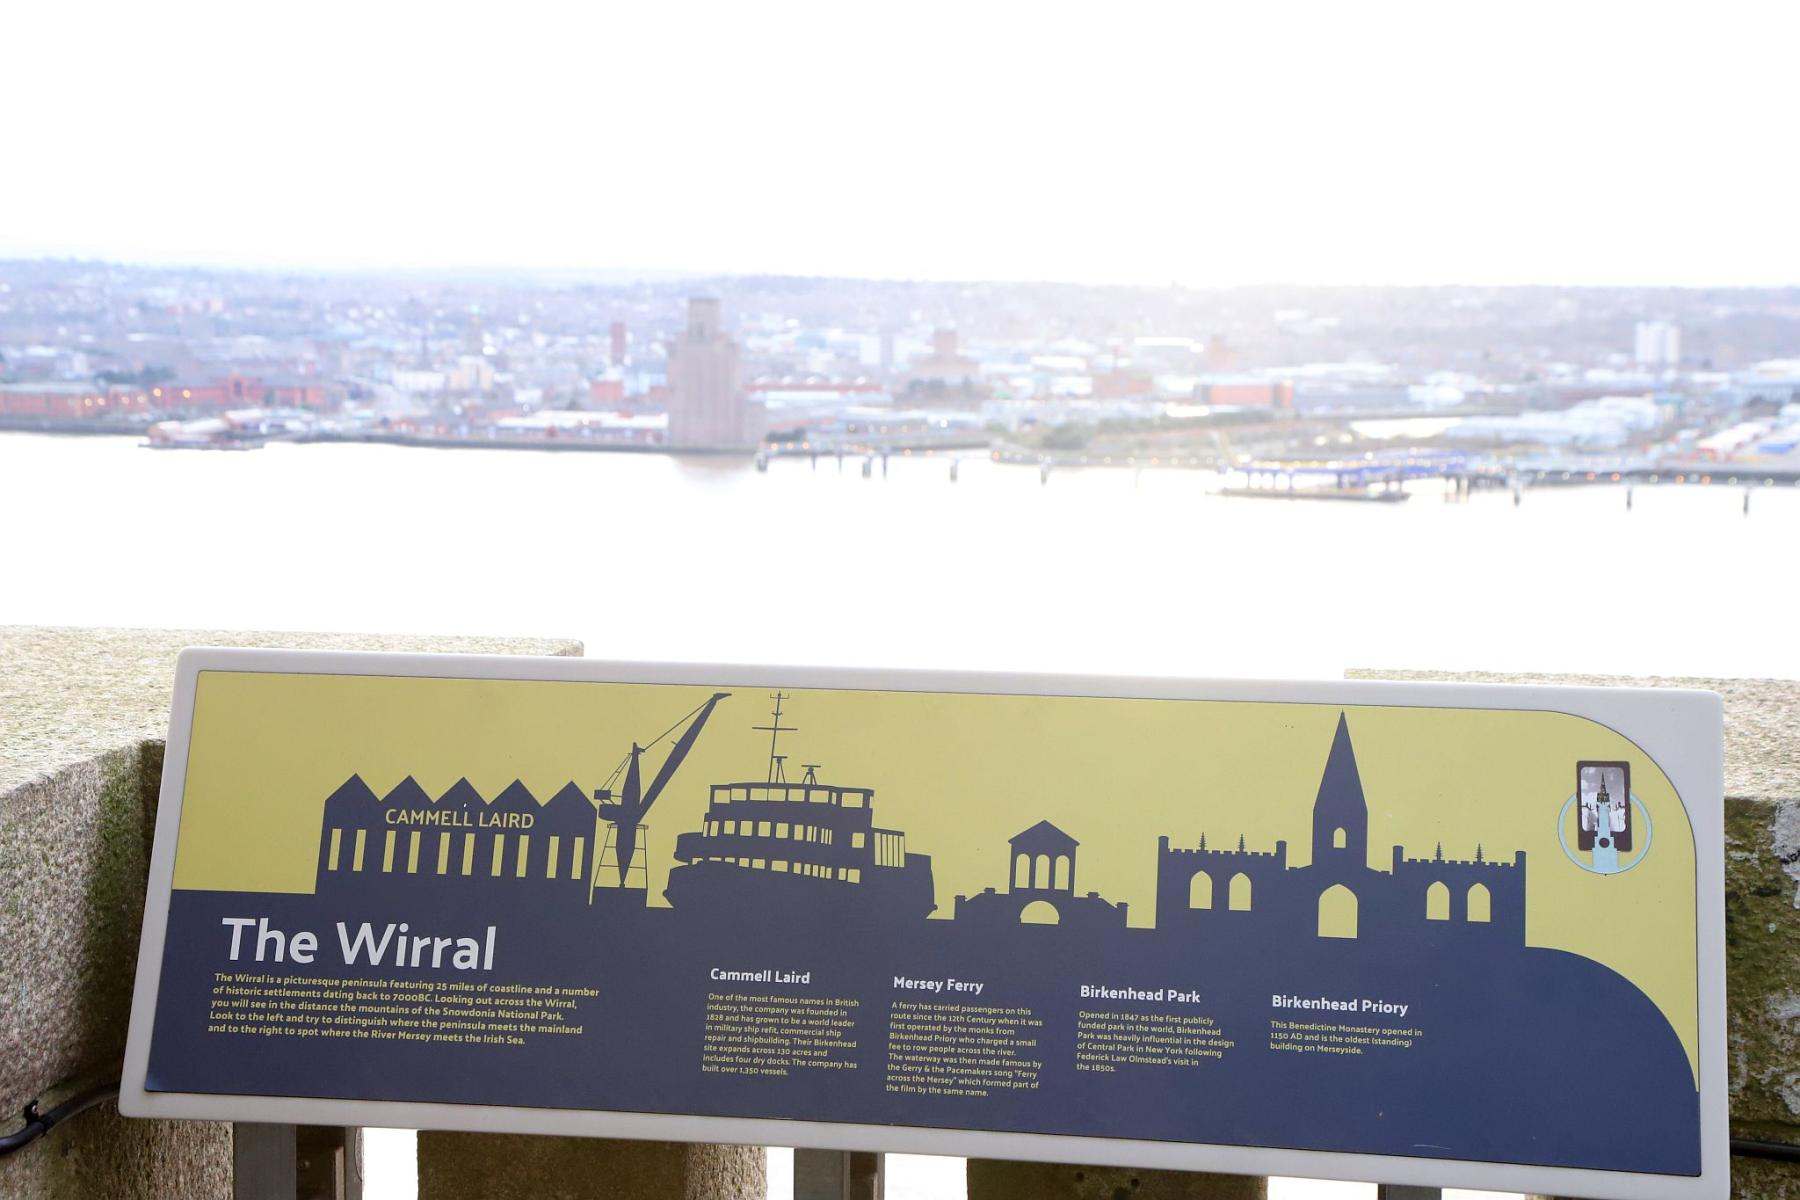 Royal Liver Building 360 Tower Tour looking from the roof to the Wirral with the information board in the foreground